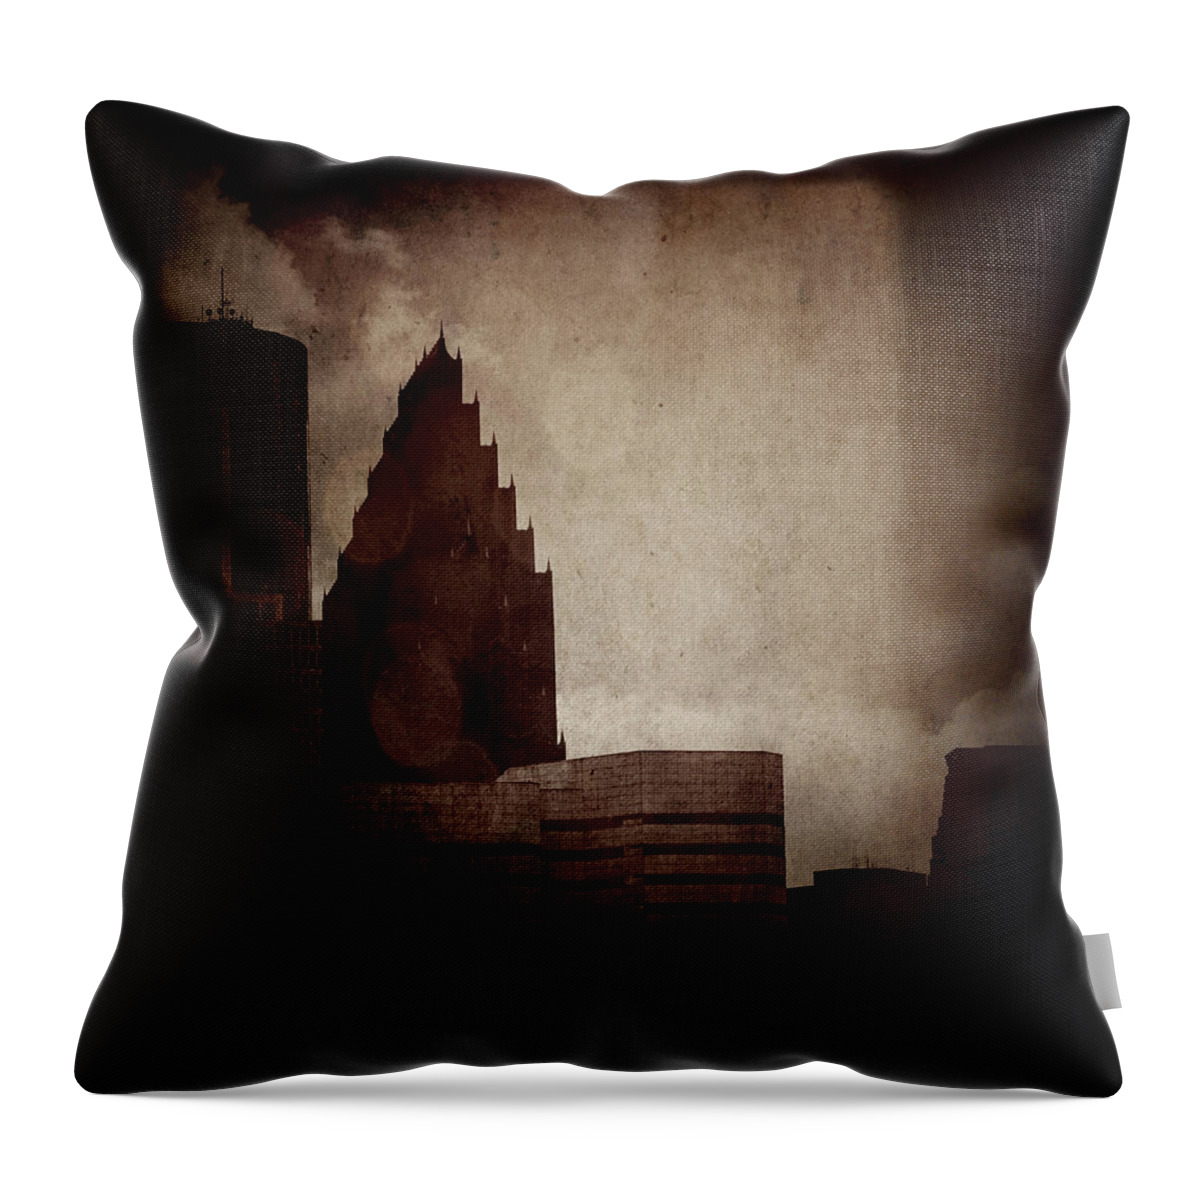 Architecture Throw Pillow featuring the photograph A City With No Name by Trish Mistric